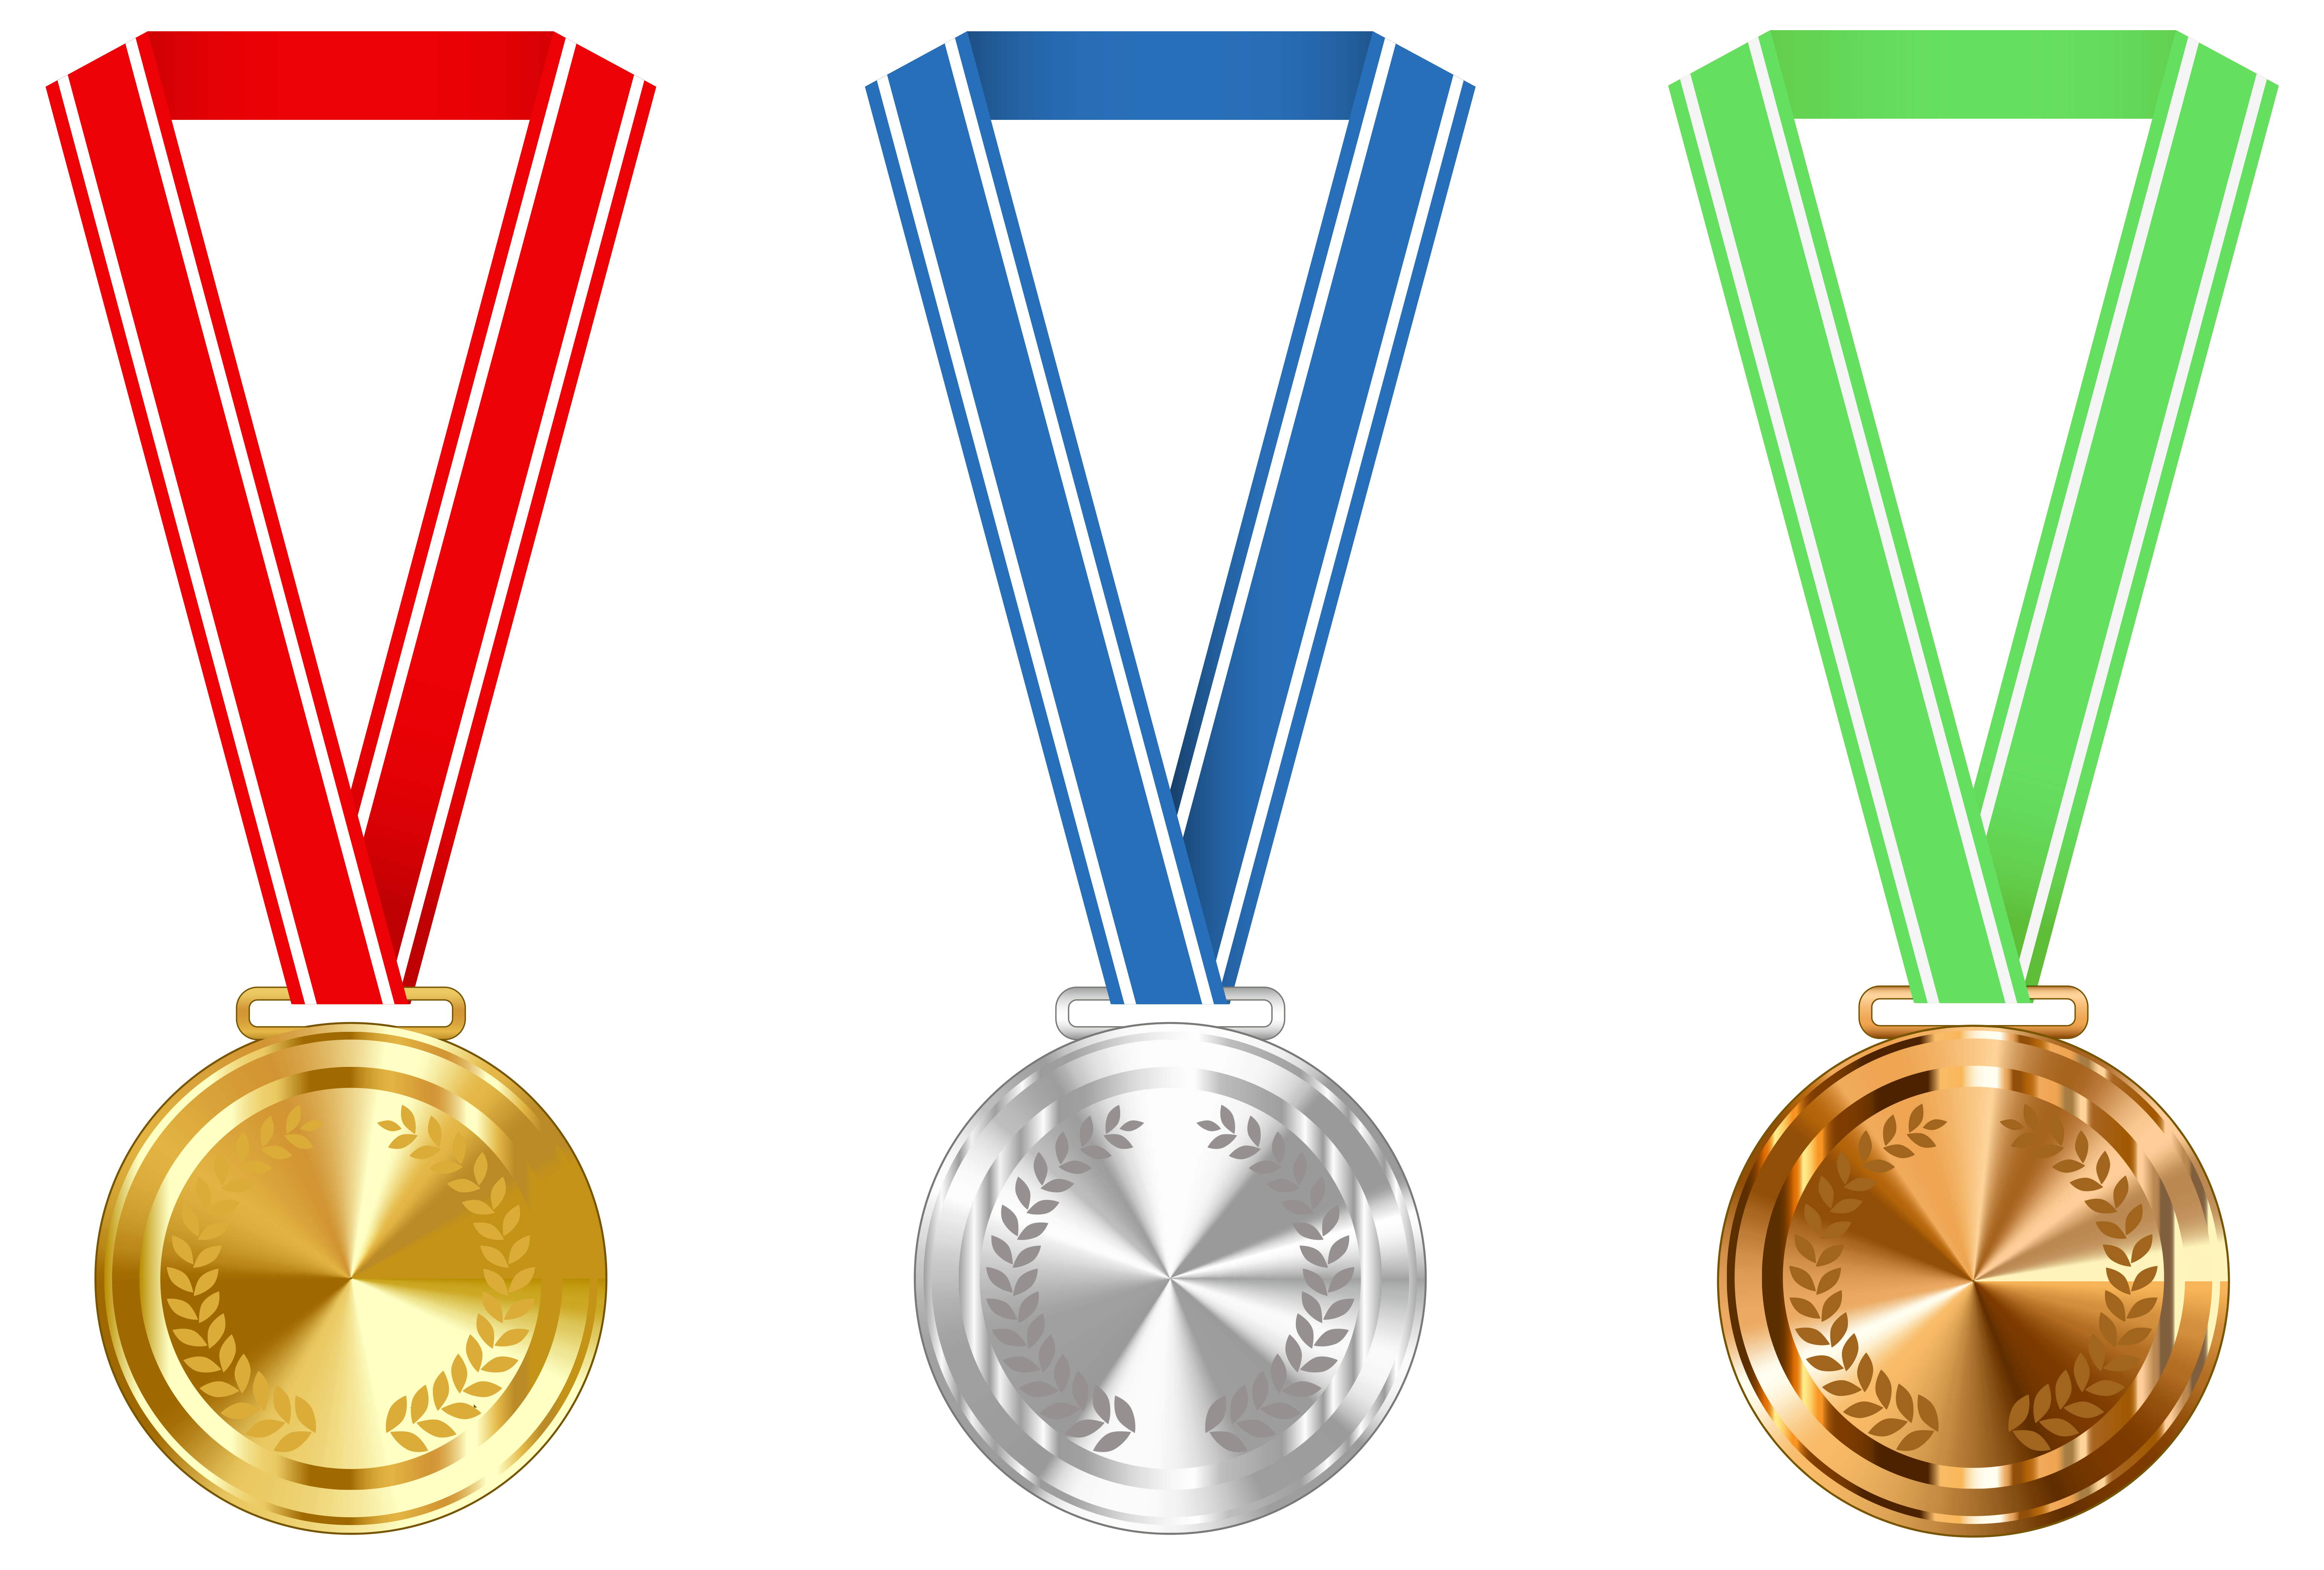 Silver and bronze medals. Podium clipart gold medal